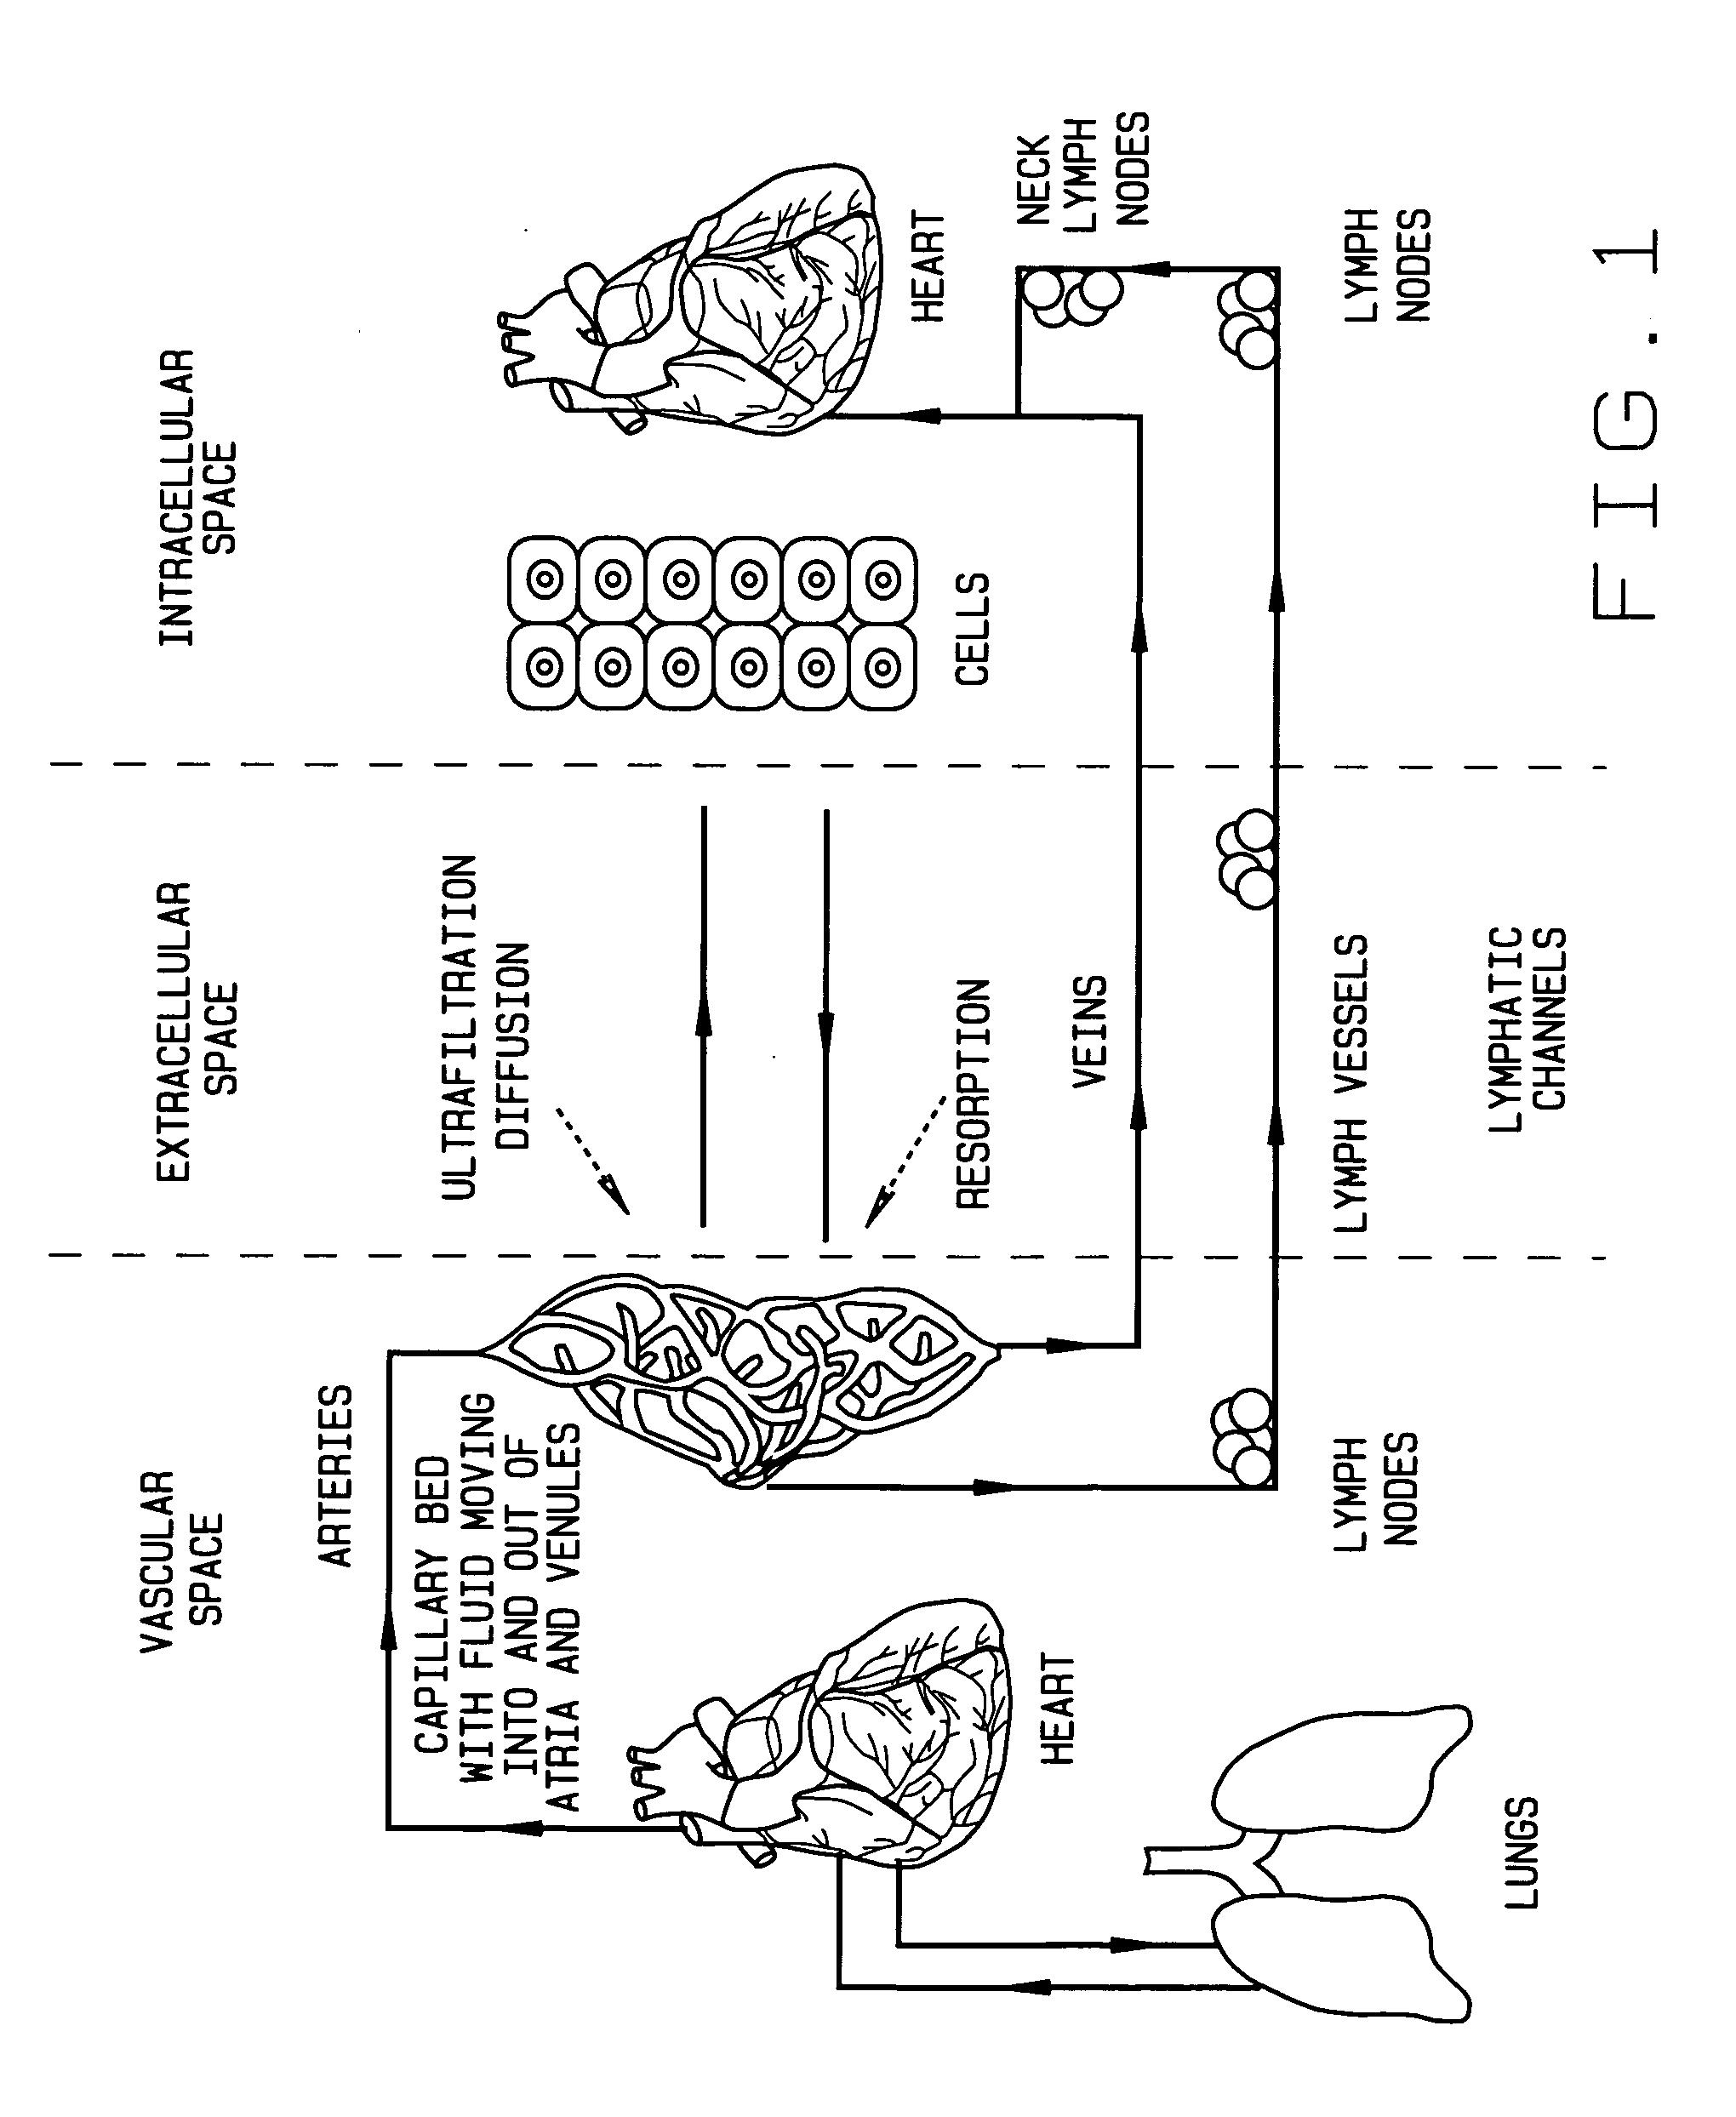 Segmented pneumatic pad for regulating pressure upon parts of the body during usage